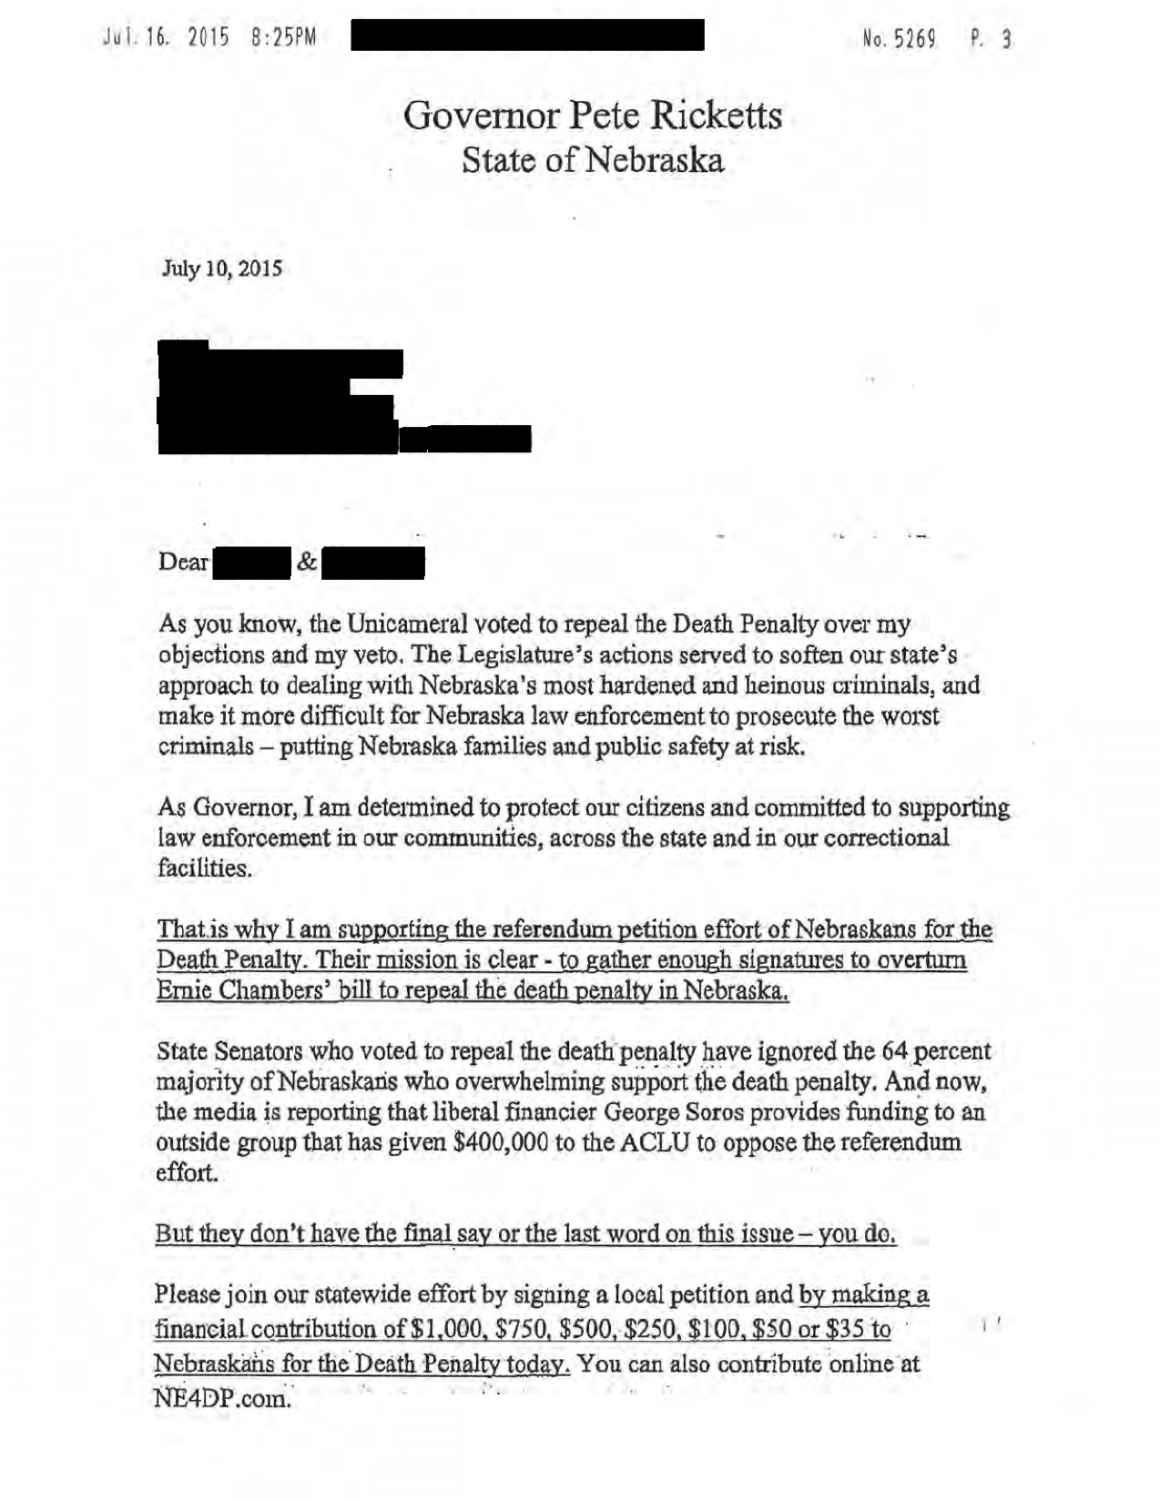 Governor's Fundraising Letter_Redacted